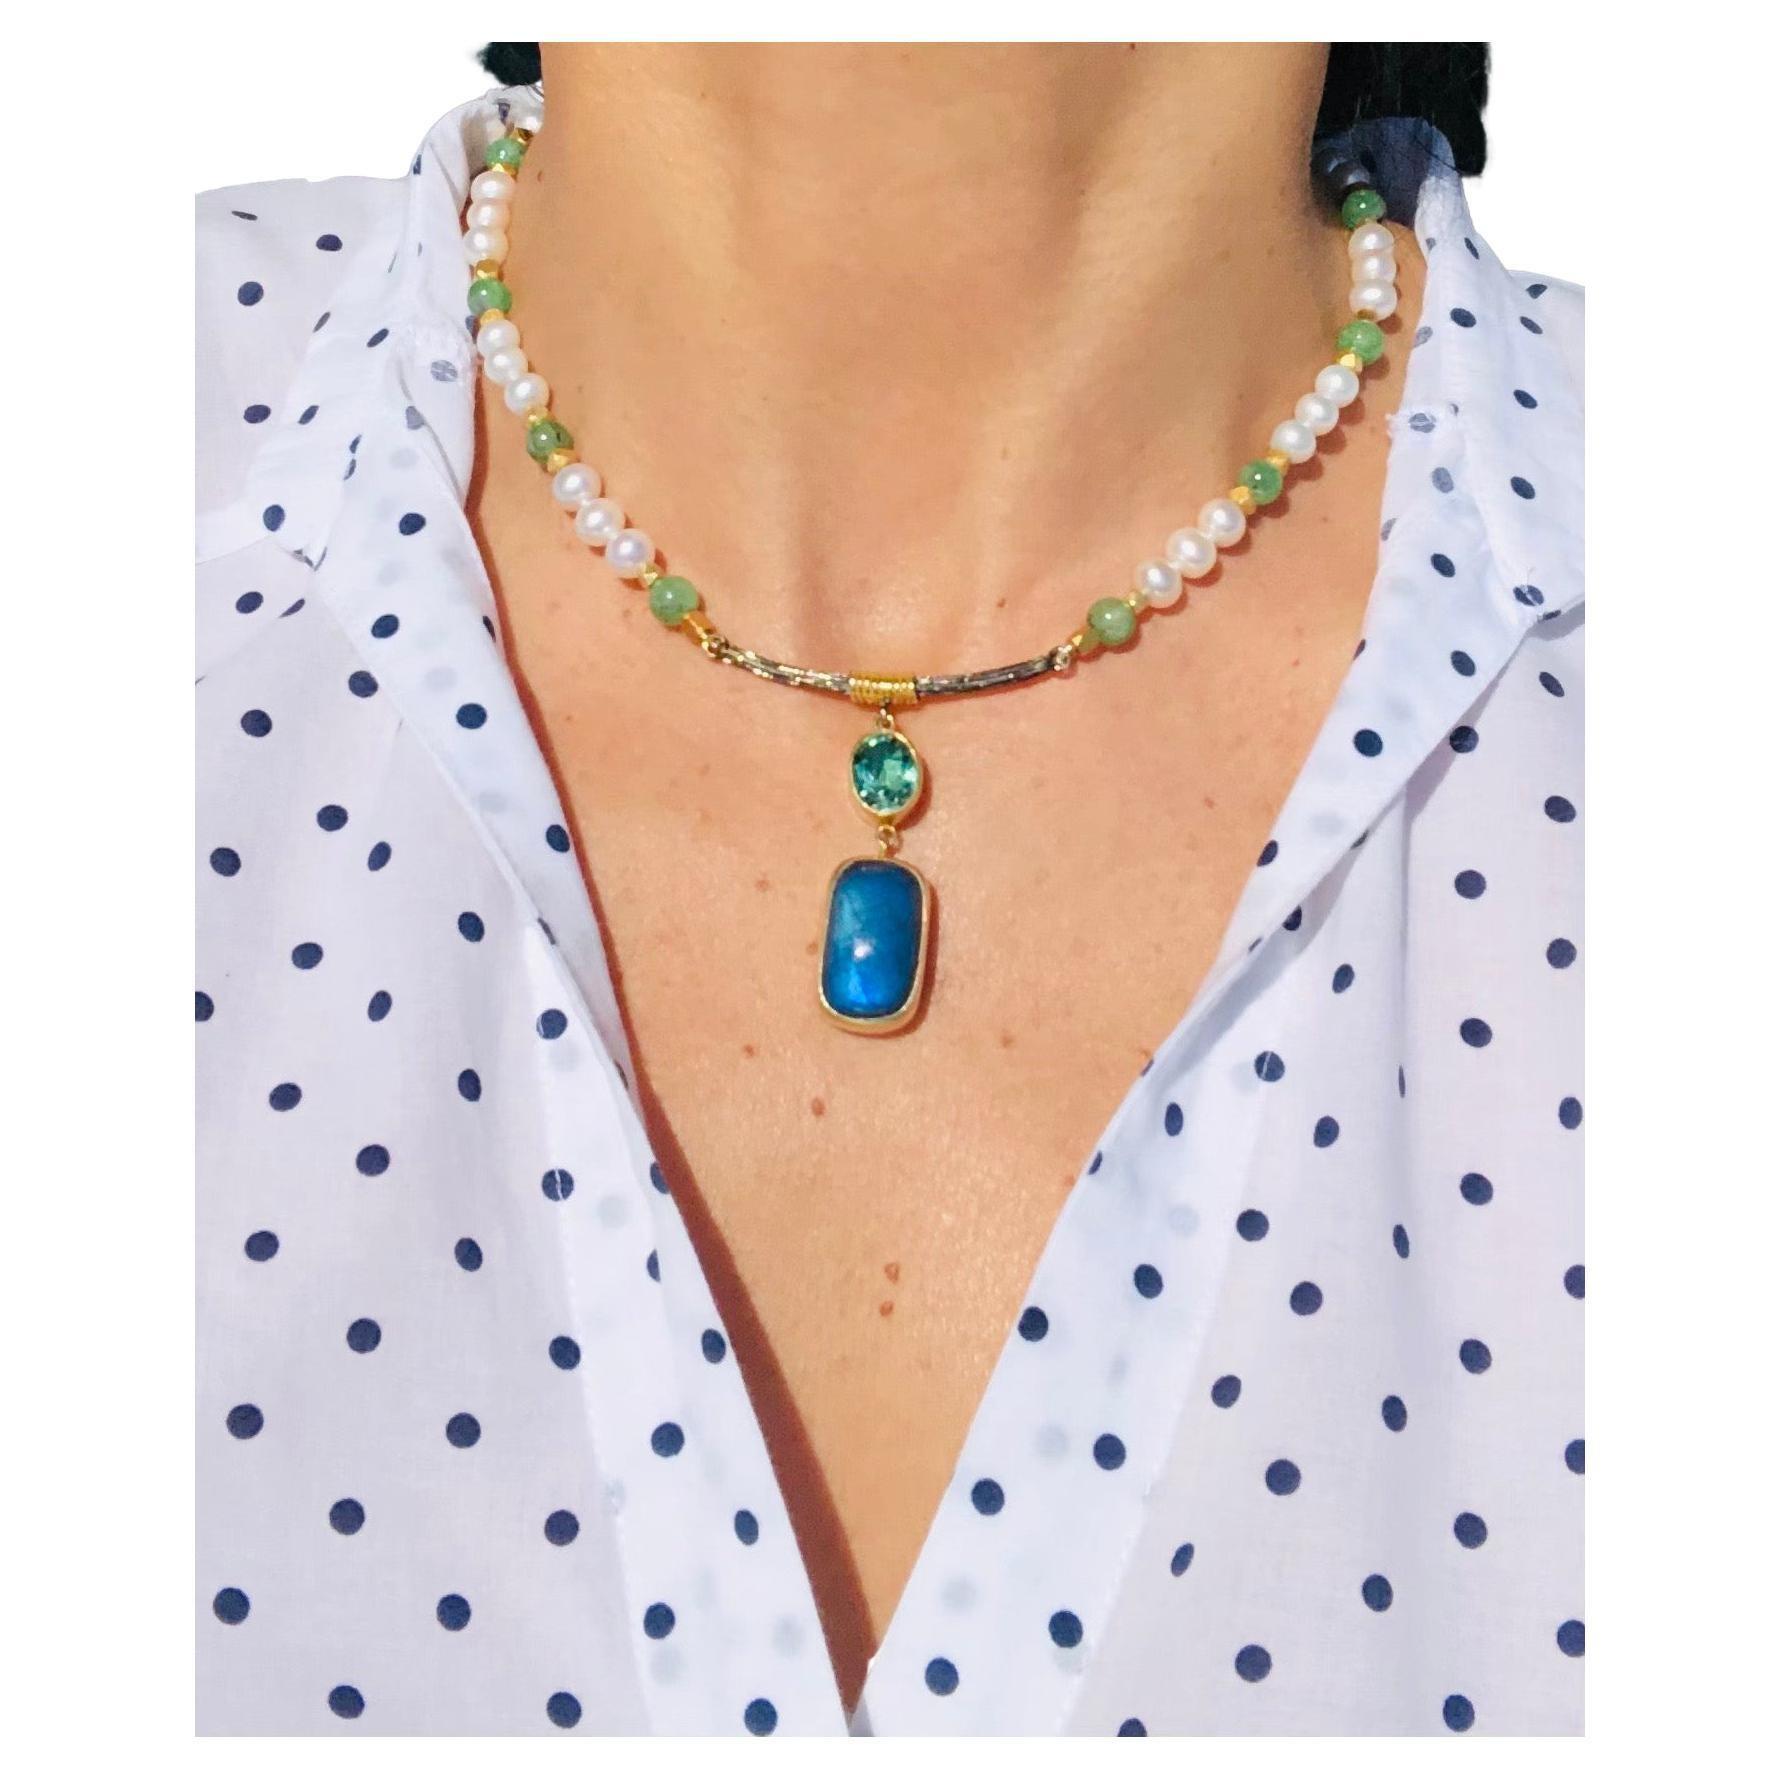 A.Jeschel Pendant Necklace with Pearls and Emerald beads is dreamy.